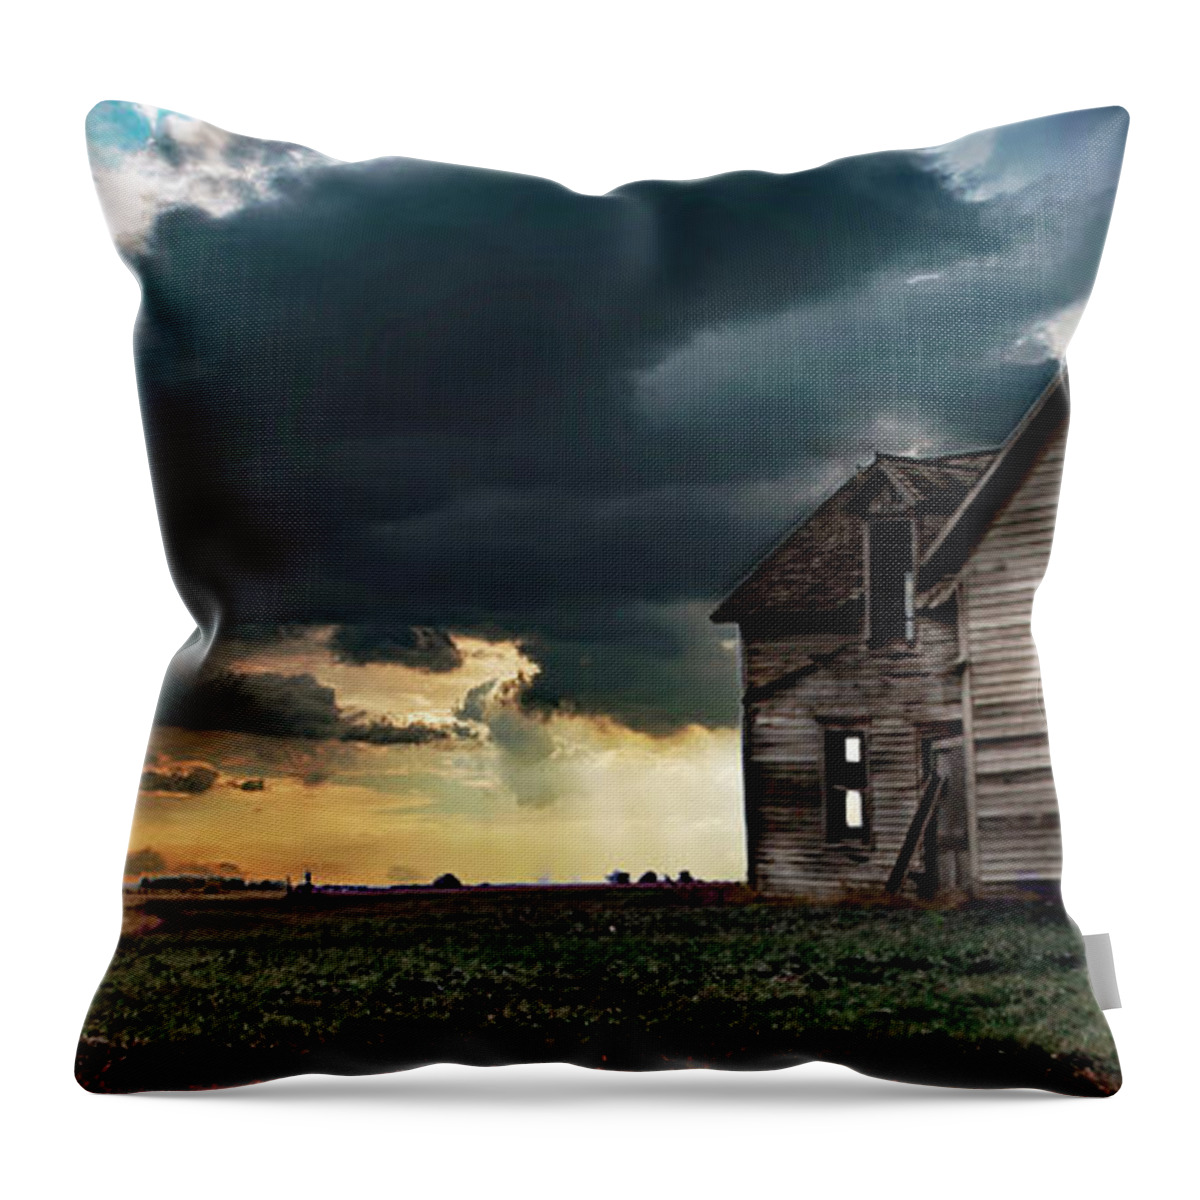 Minnesota Throw Pillow featuring the photograph They're Gone by Hans Brakob